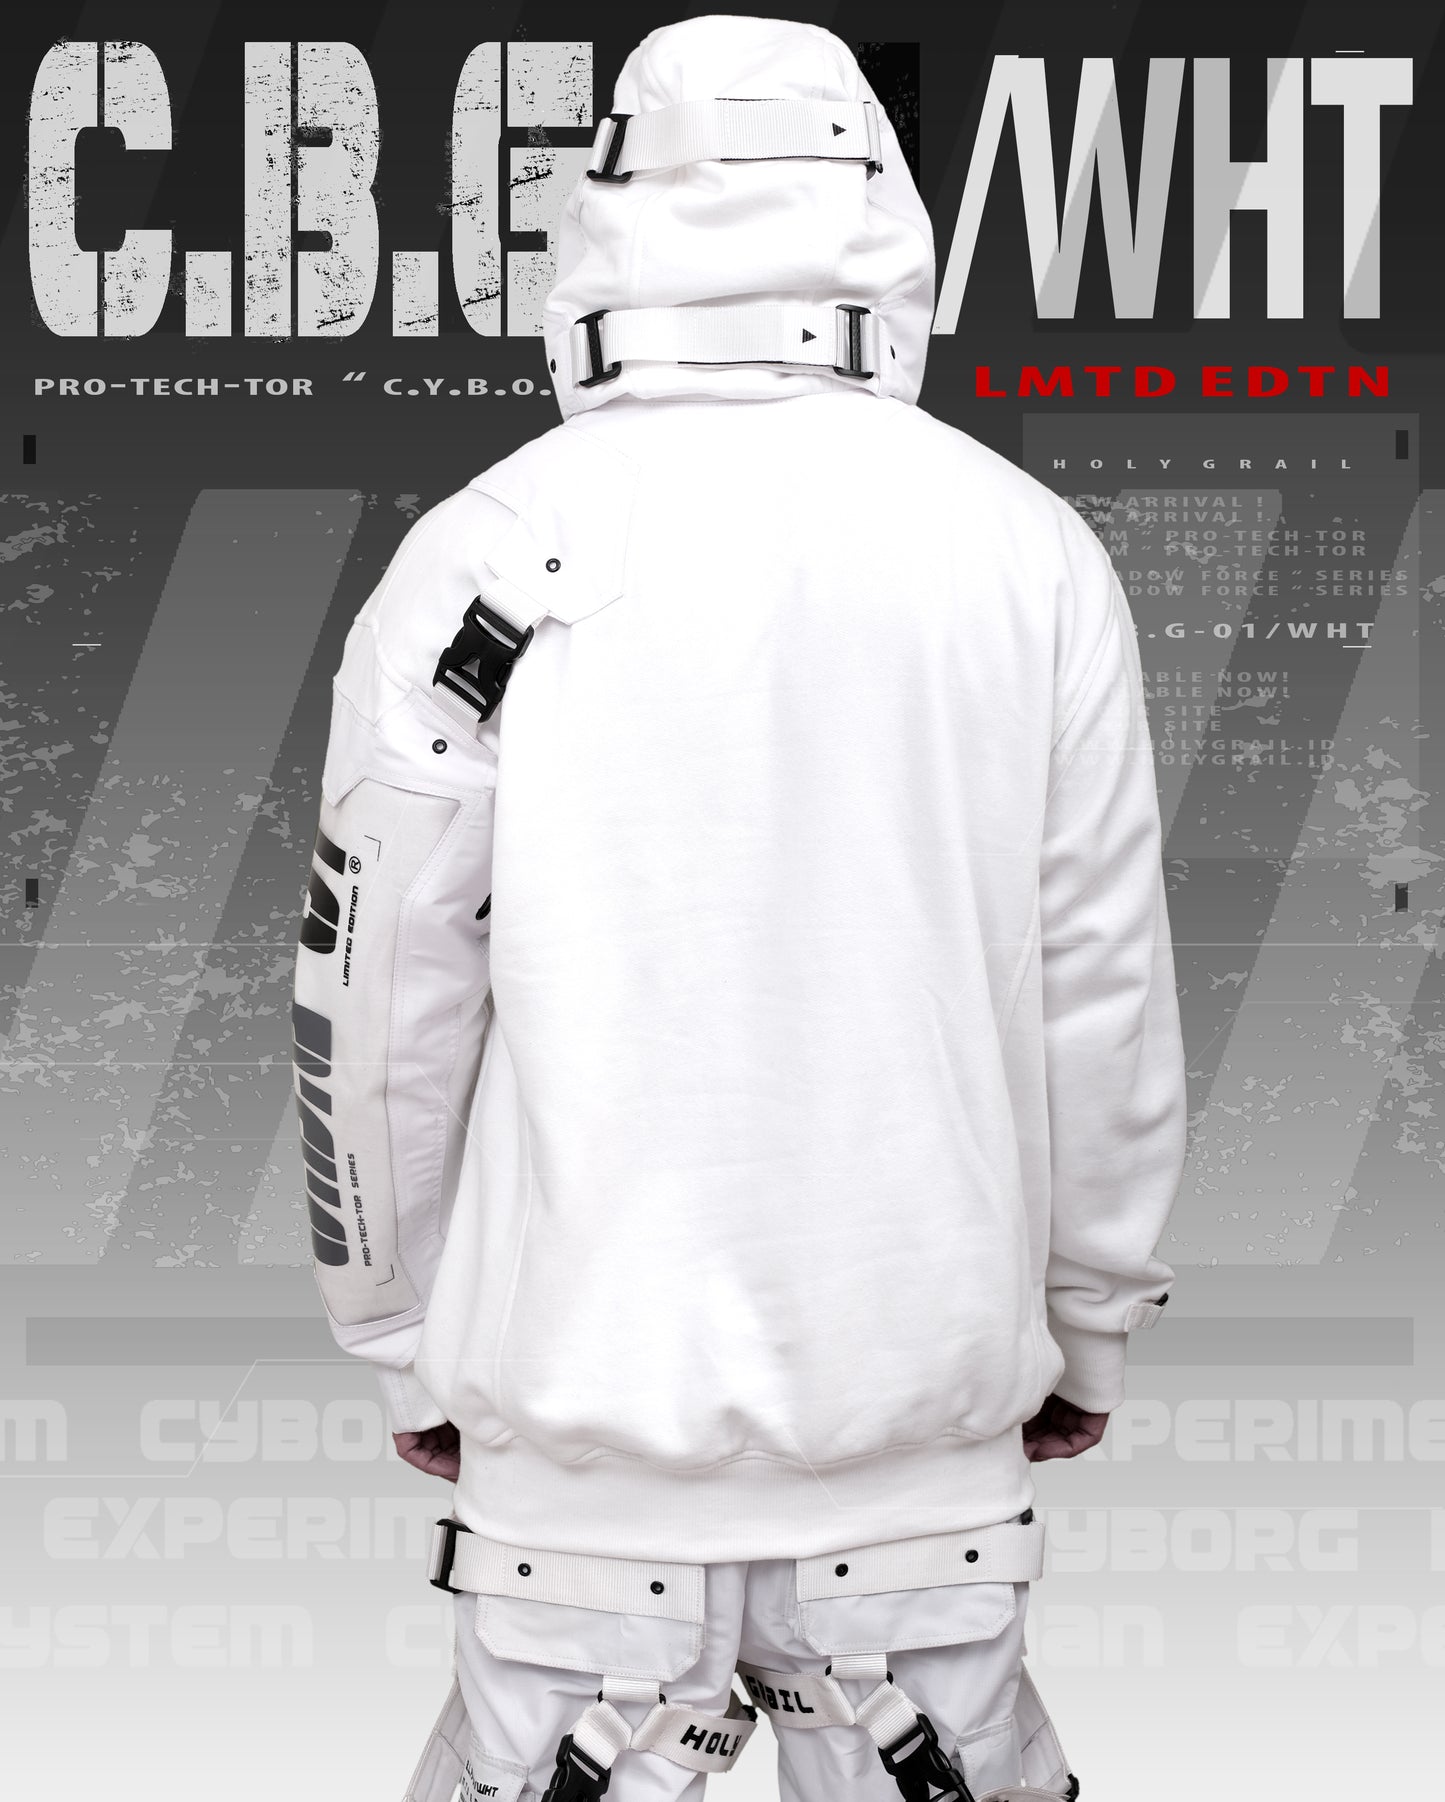 C.B.G-01/WHT( SOLD OUT! )